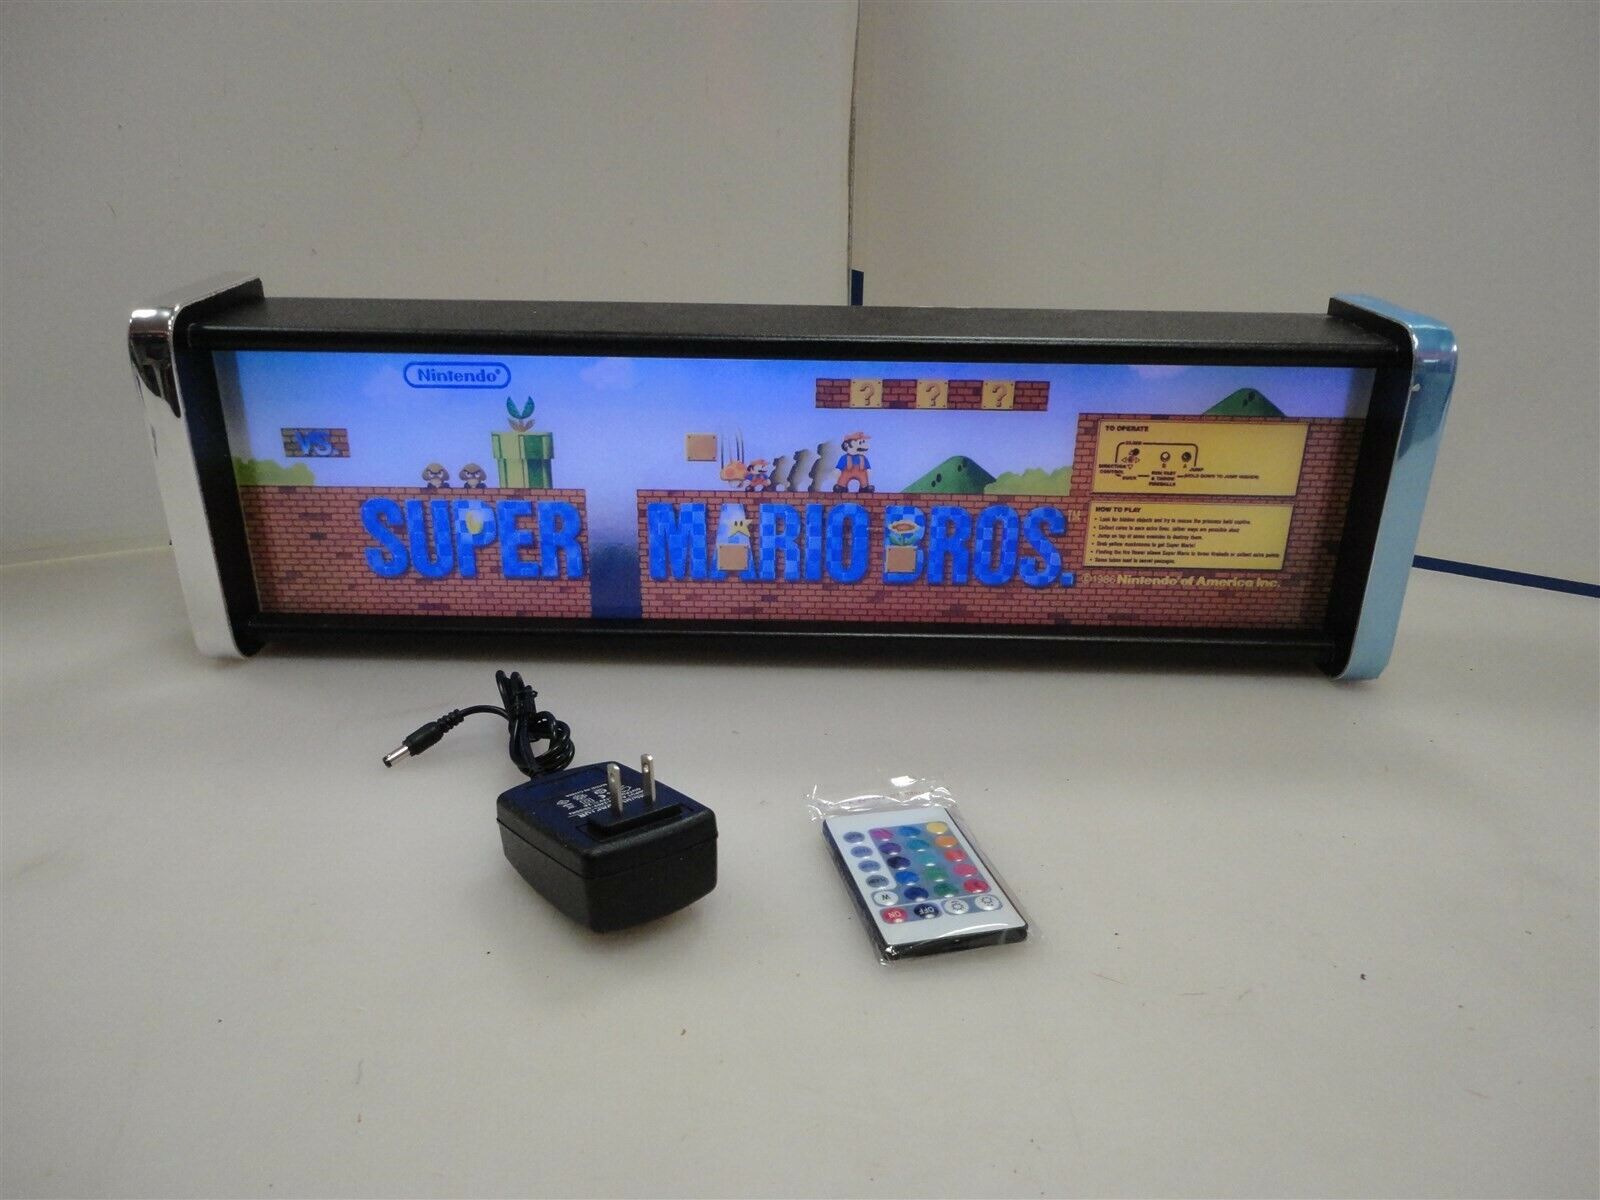 Nintendo Super Mario Brothers Marquee Game/Rec Room LED Display light box